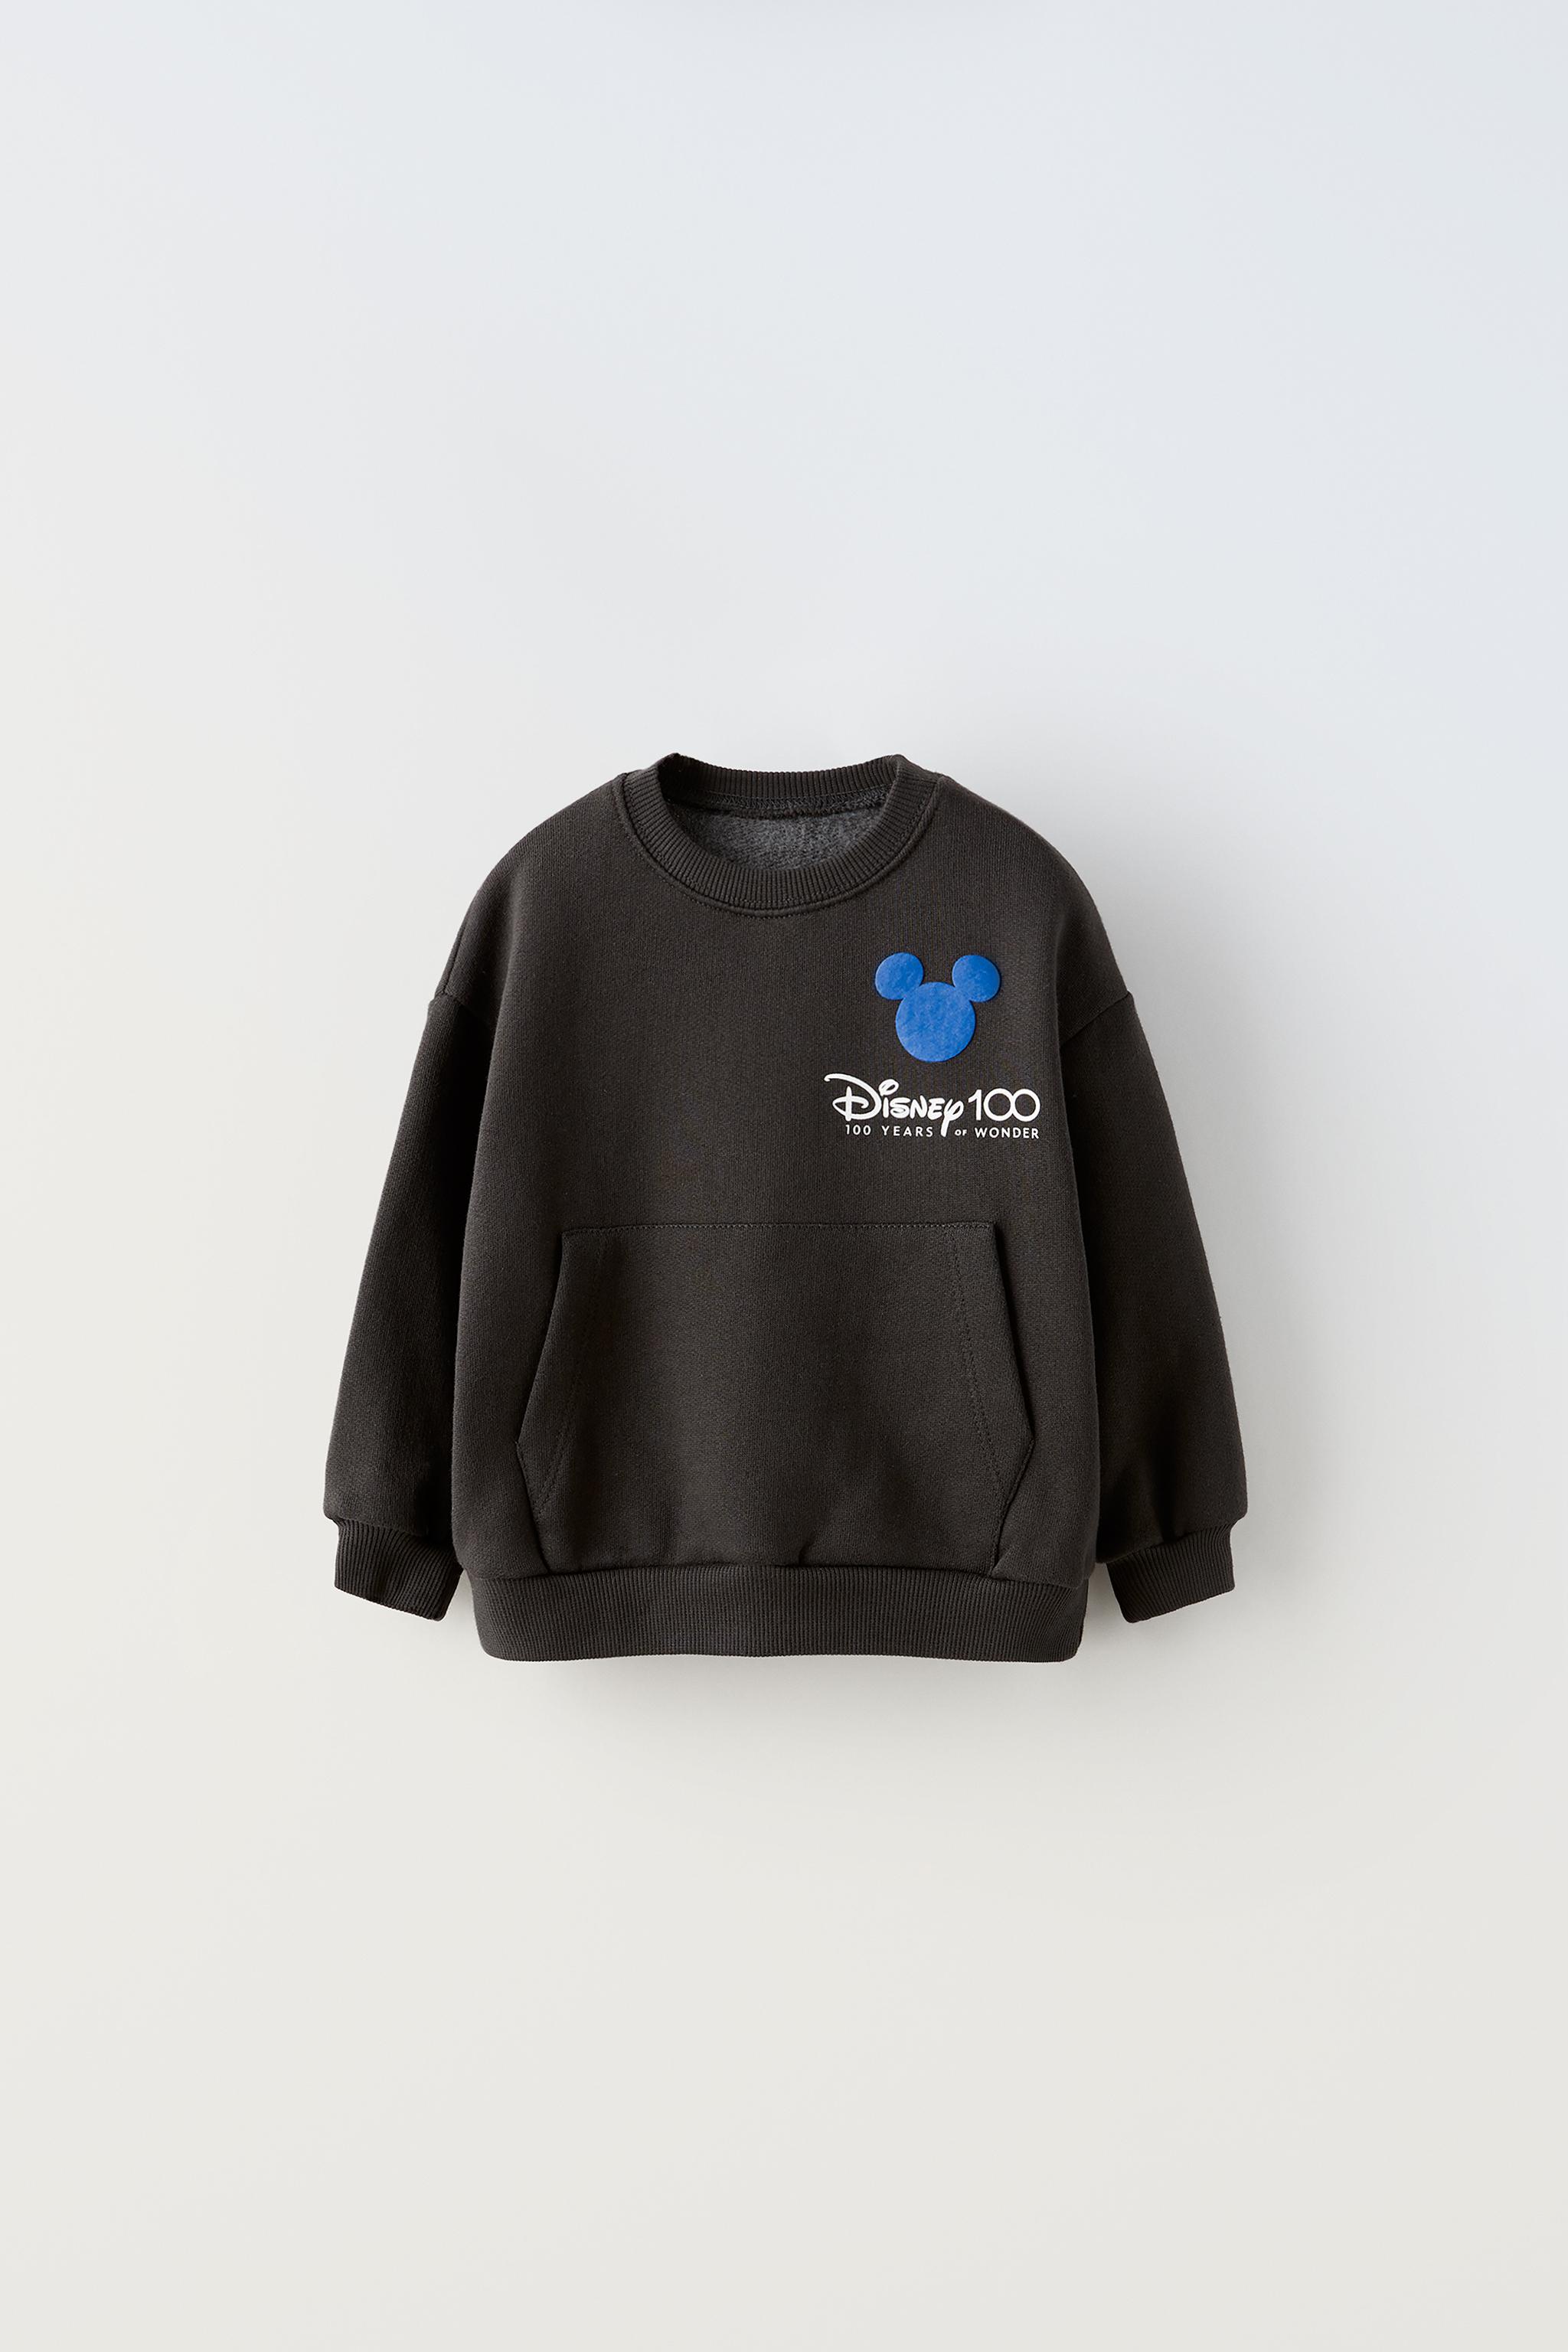 Celebrating 100 Years of Disney Magic with Our Girls' Hoodie and